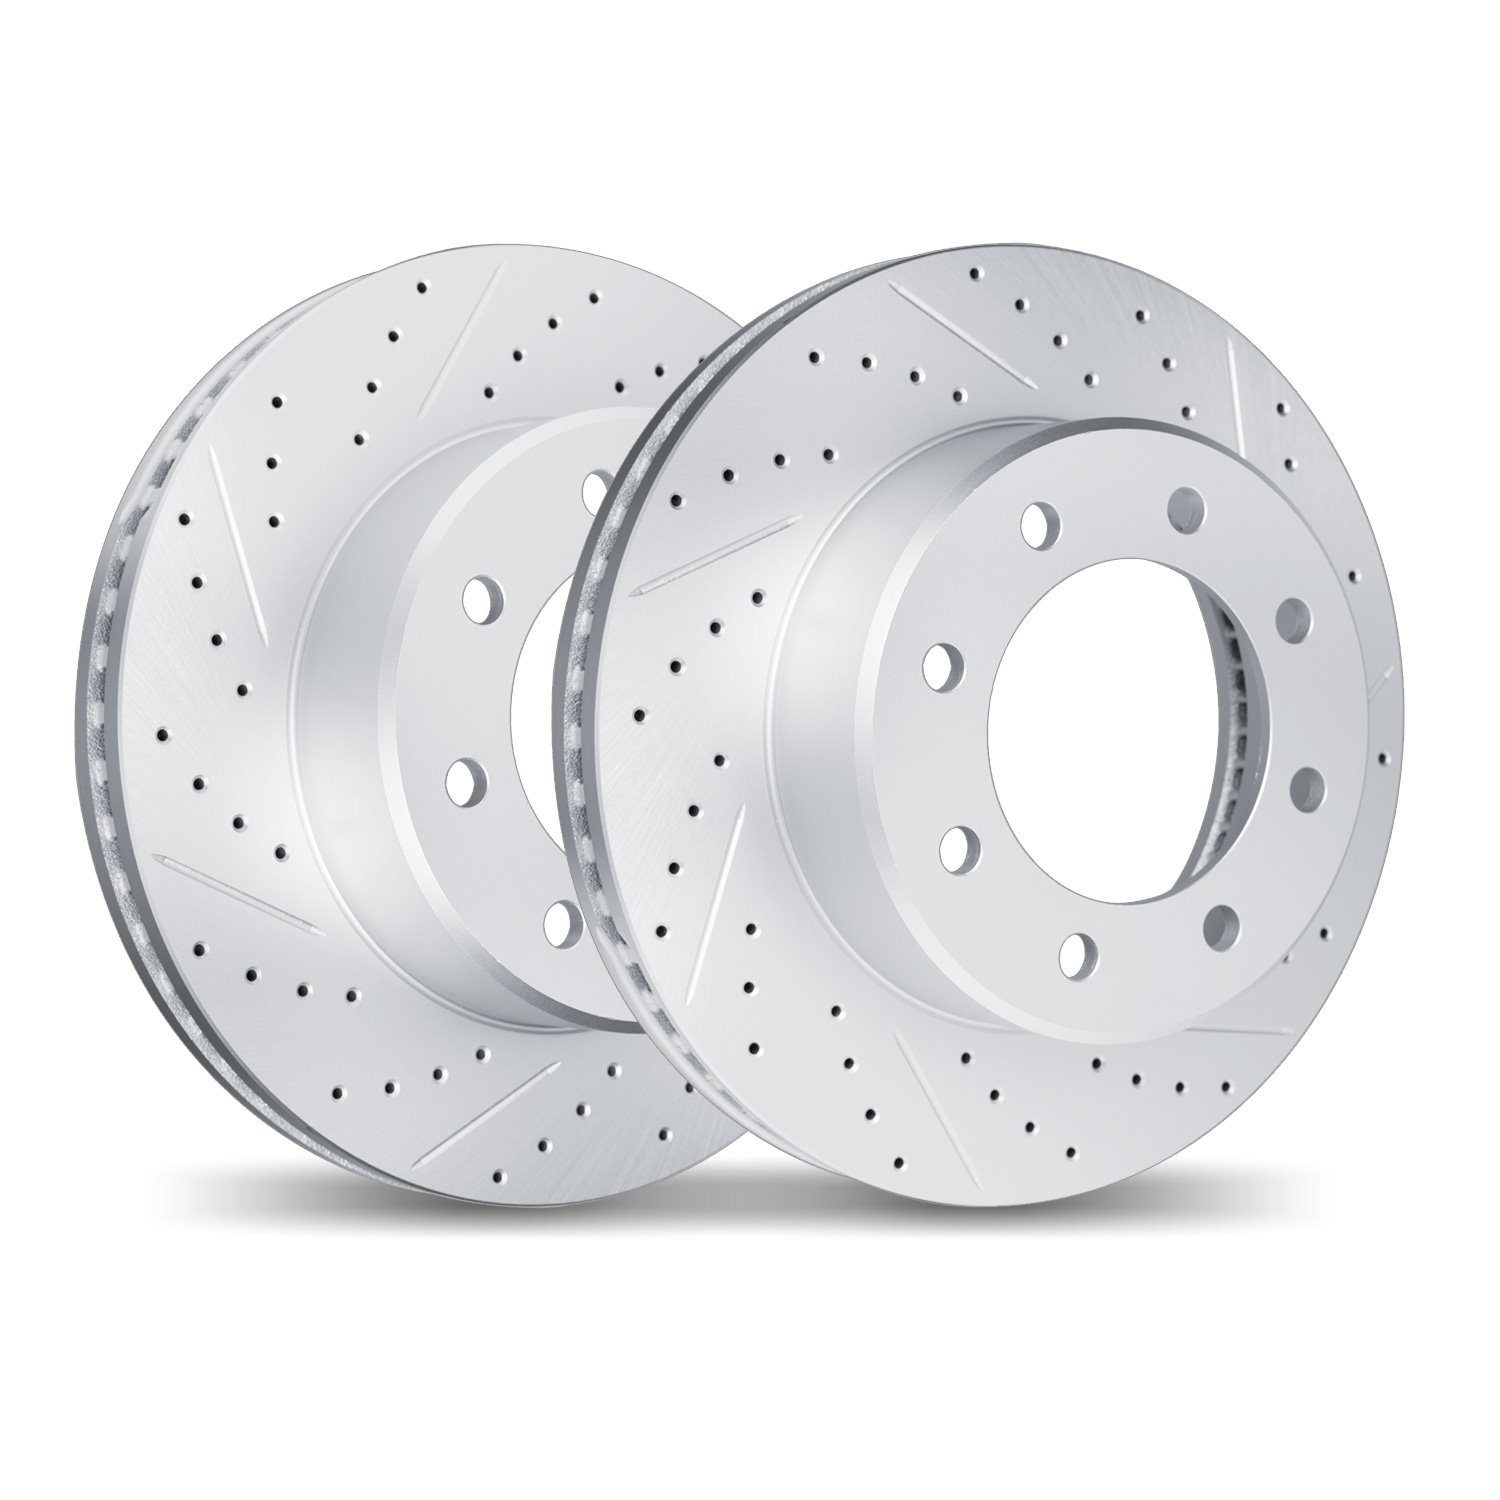 2002-67034 Geoperformance Drilled/Slotted Brake Rotors, 2012-2021 Infiniti/Nissan, Position: Front